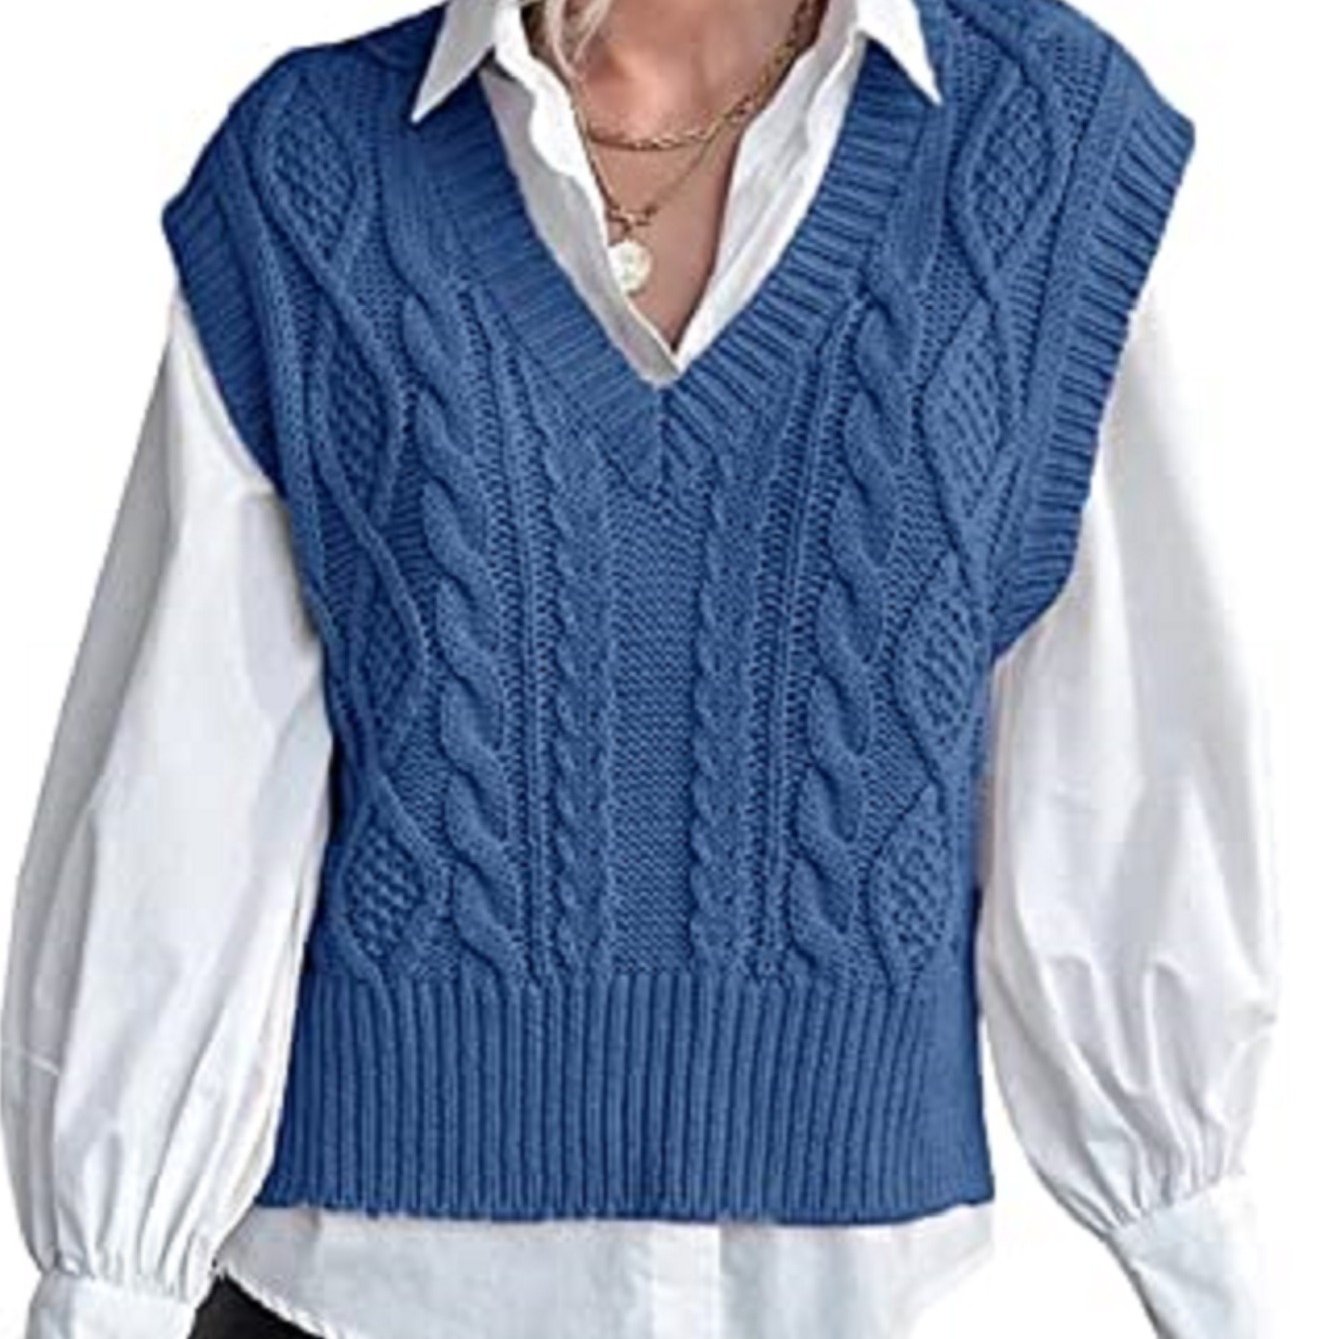 Sweater Vest for Women V Neck Sleeveless Knit Solid Casual Ribbed